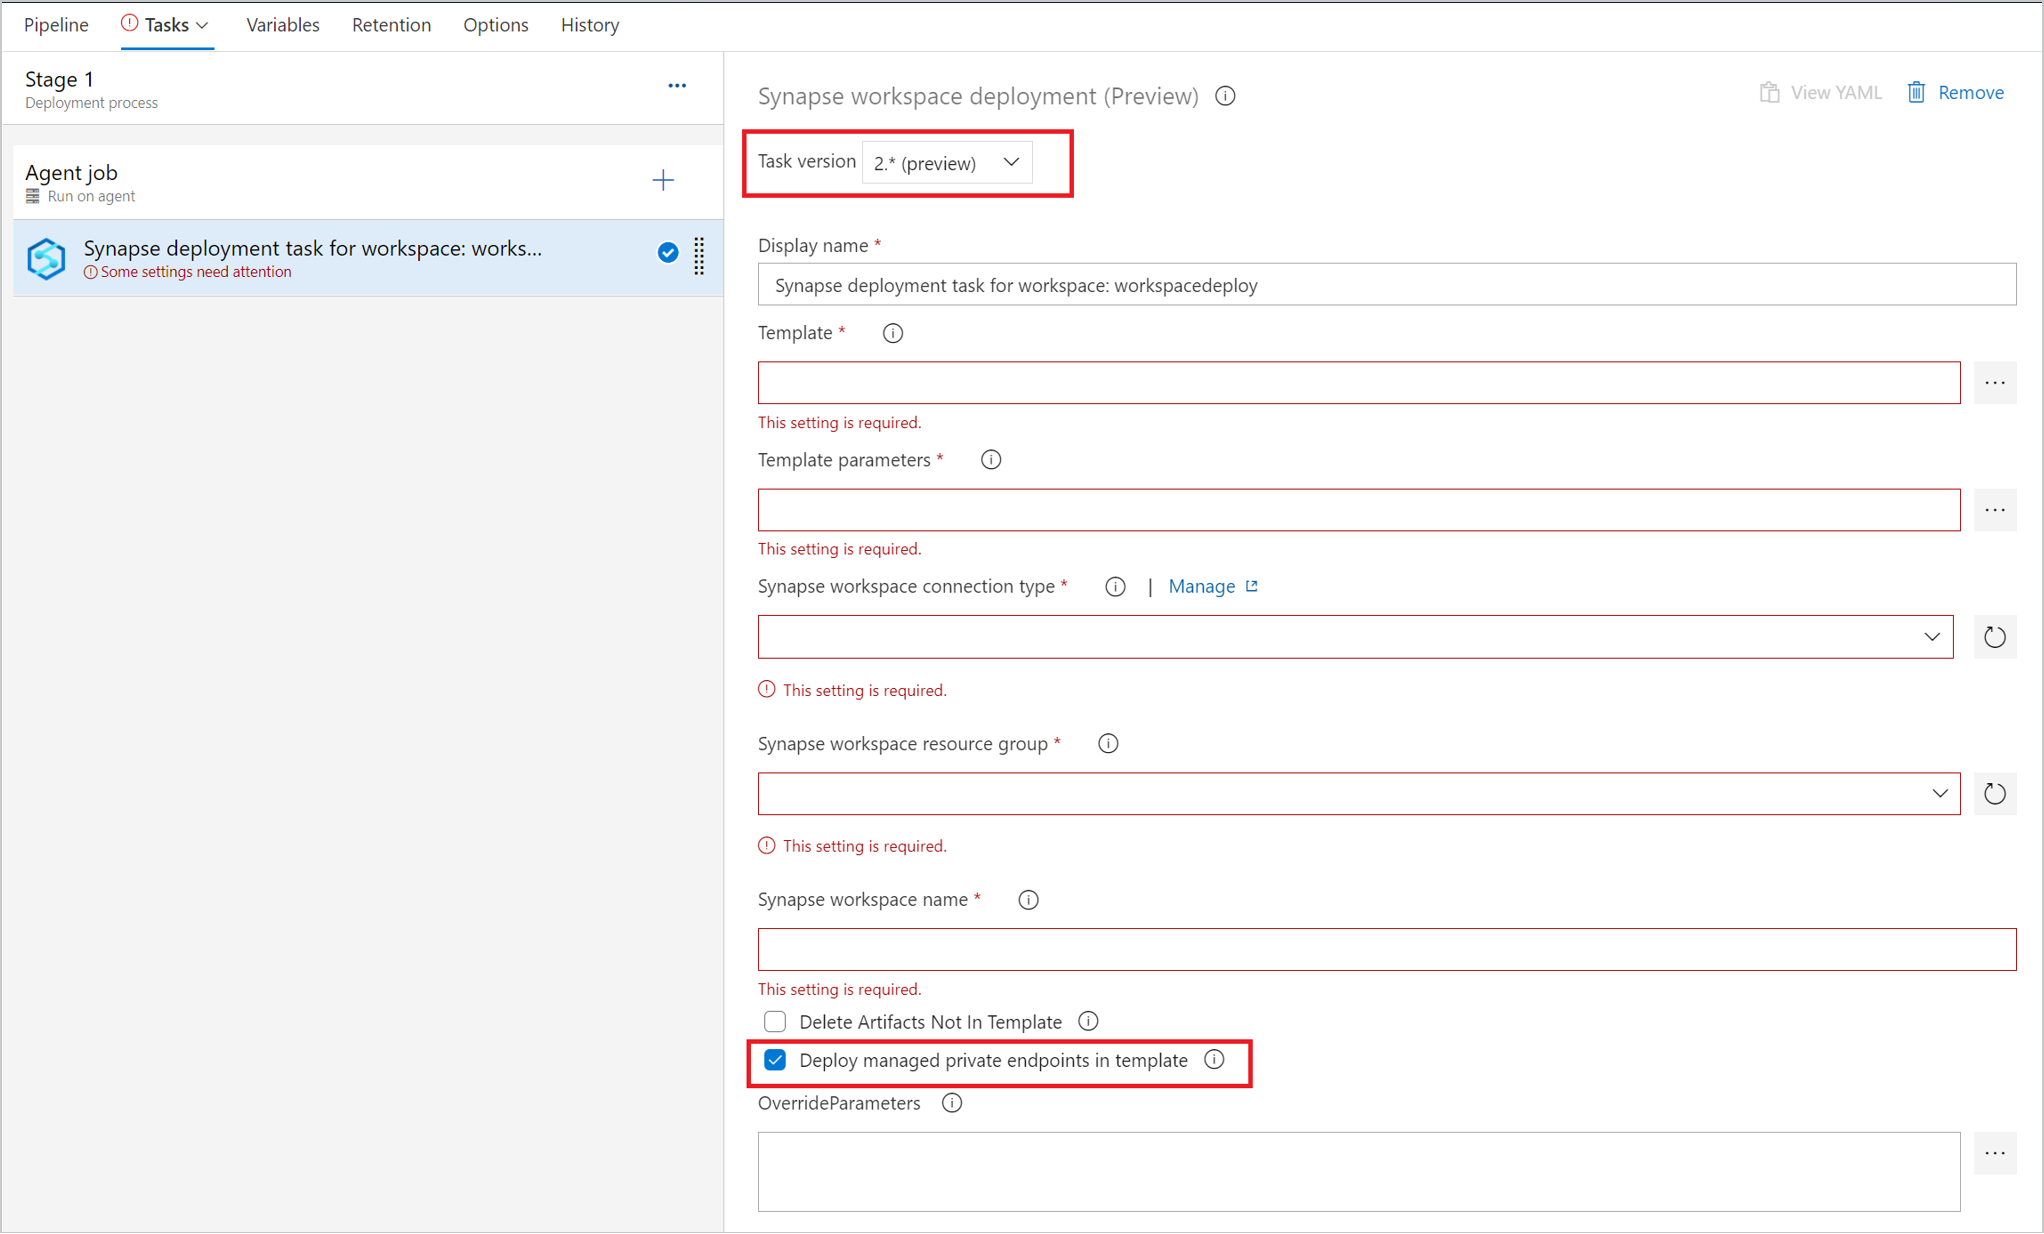 Screenshot that shows selecting version 2.x to deploy private endpoints with synapse deployment task.